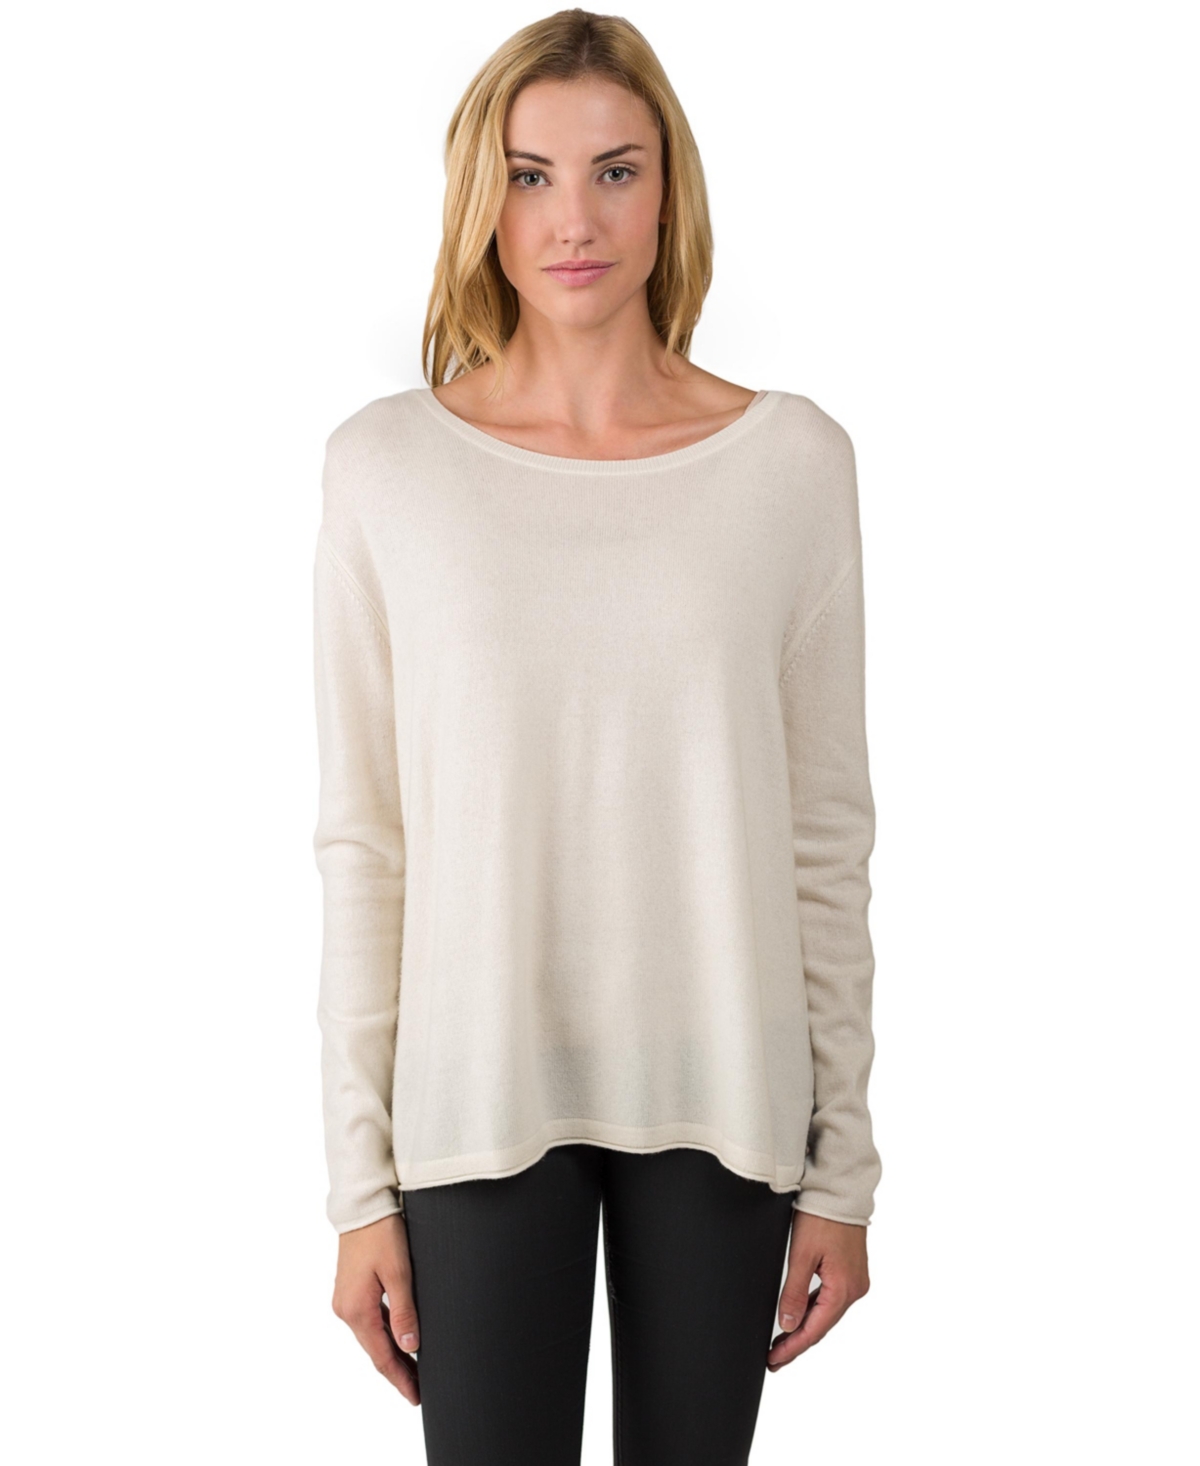 J Cashmere Women's 100% Cashmere Dolman Sleeve Pullover High Low Sweater - Cream